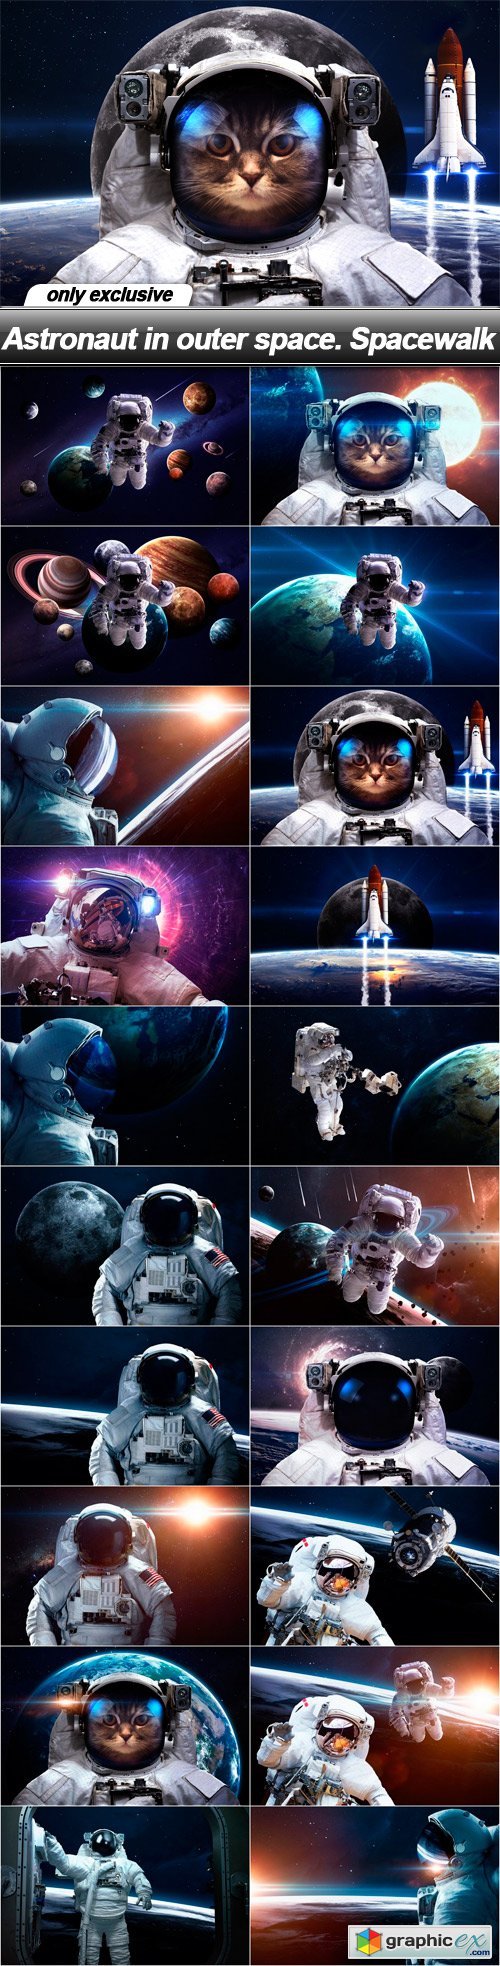 Astronaut in outer space. Spacewalk - 20 UHQ JPEG